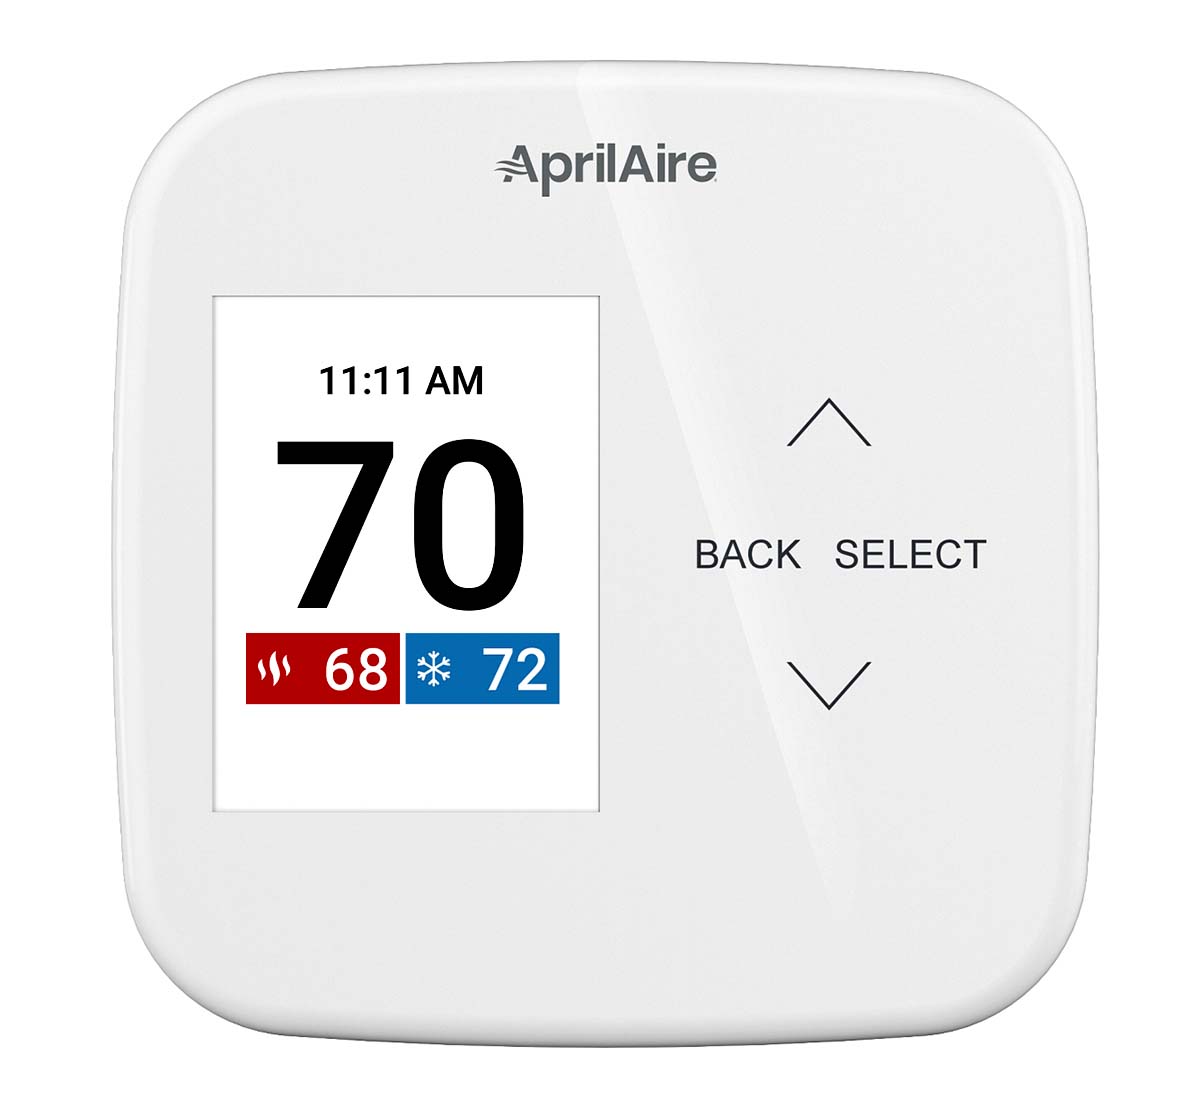 AprilAire Model S86 Wi-Fi Thermostat.